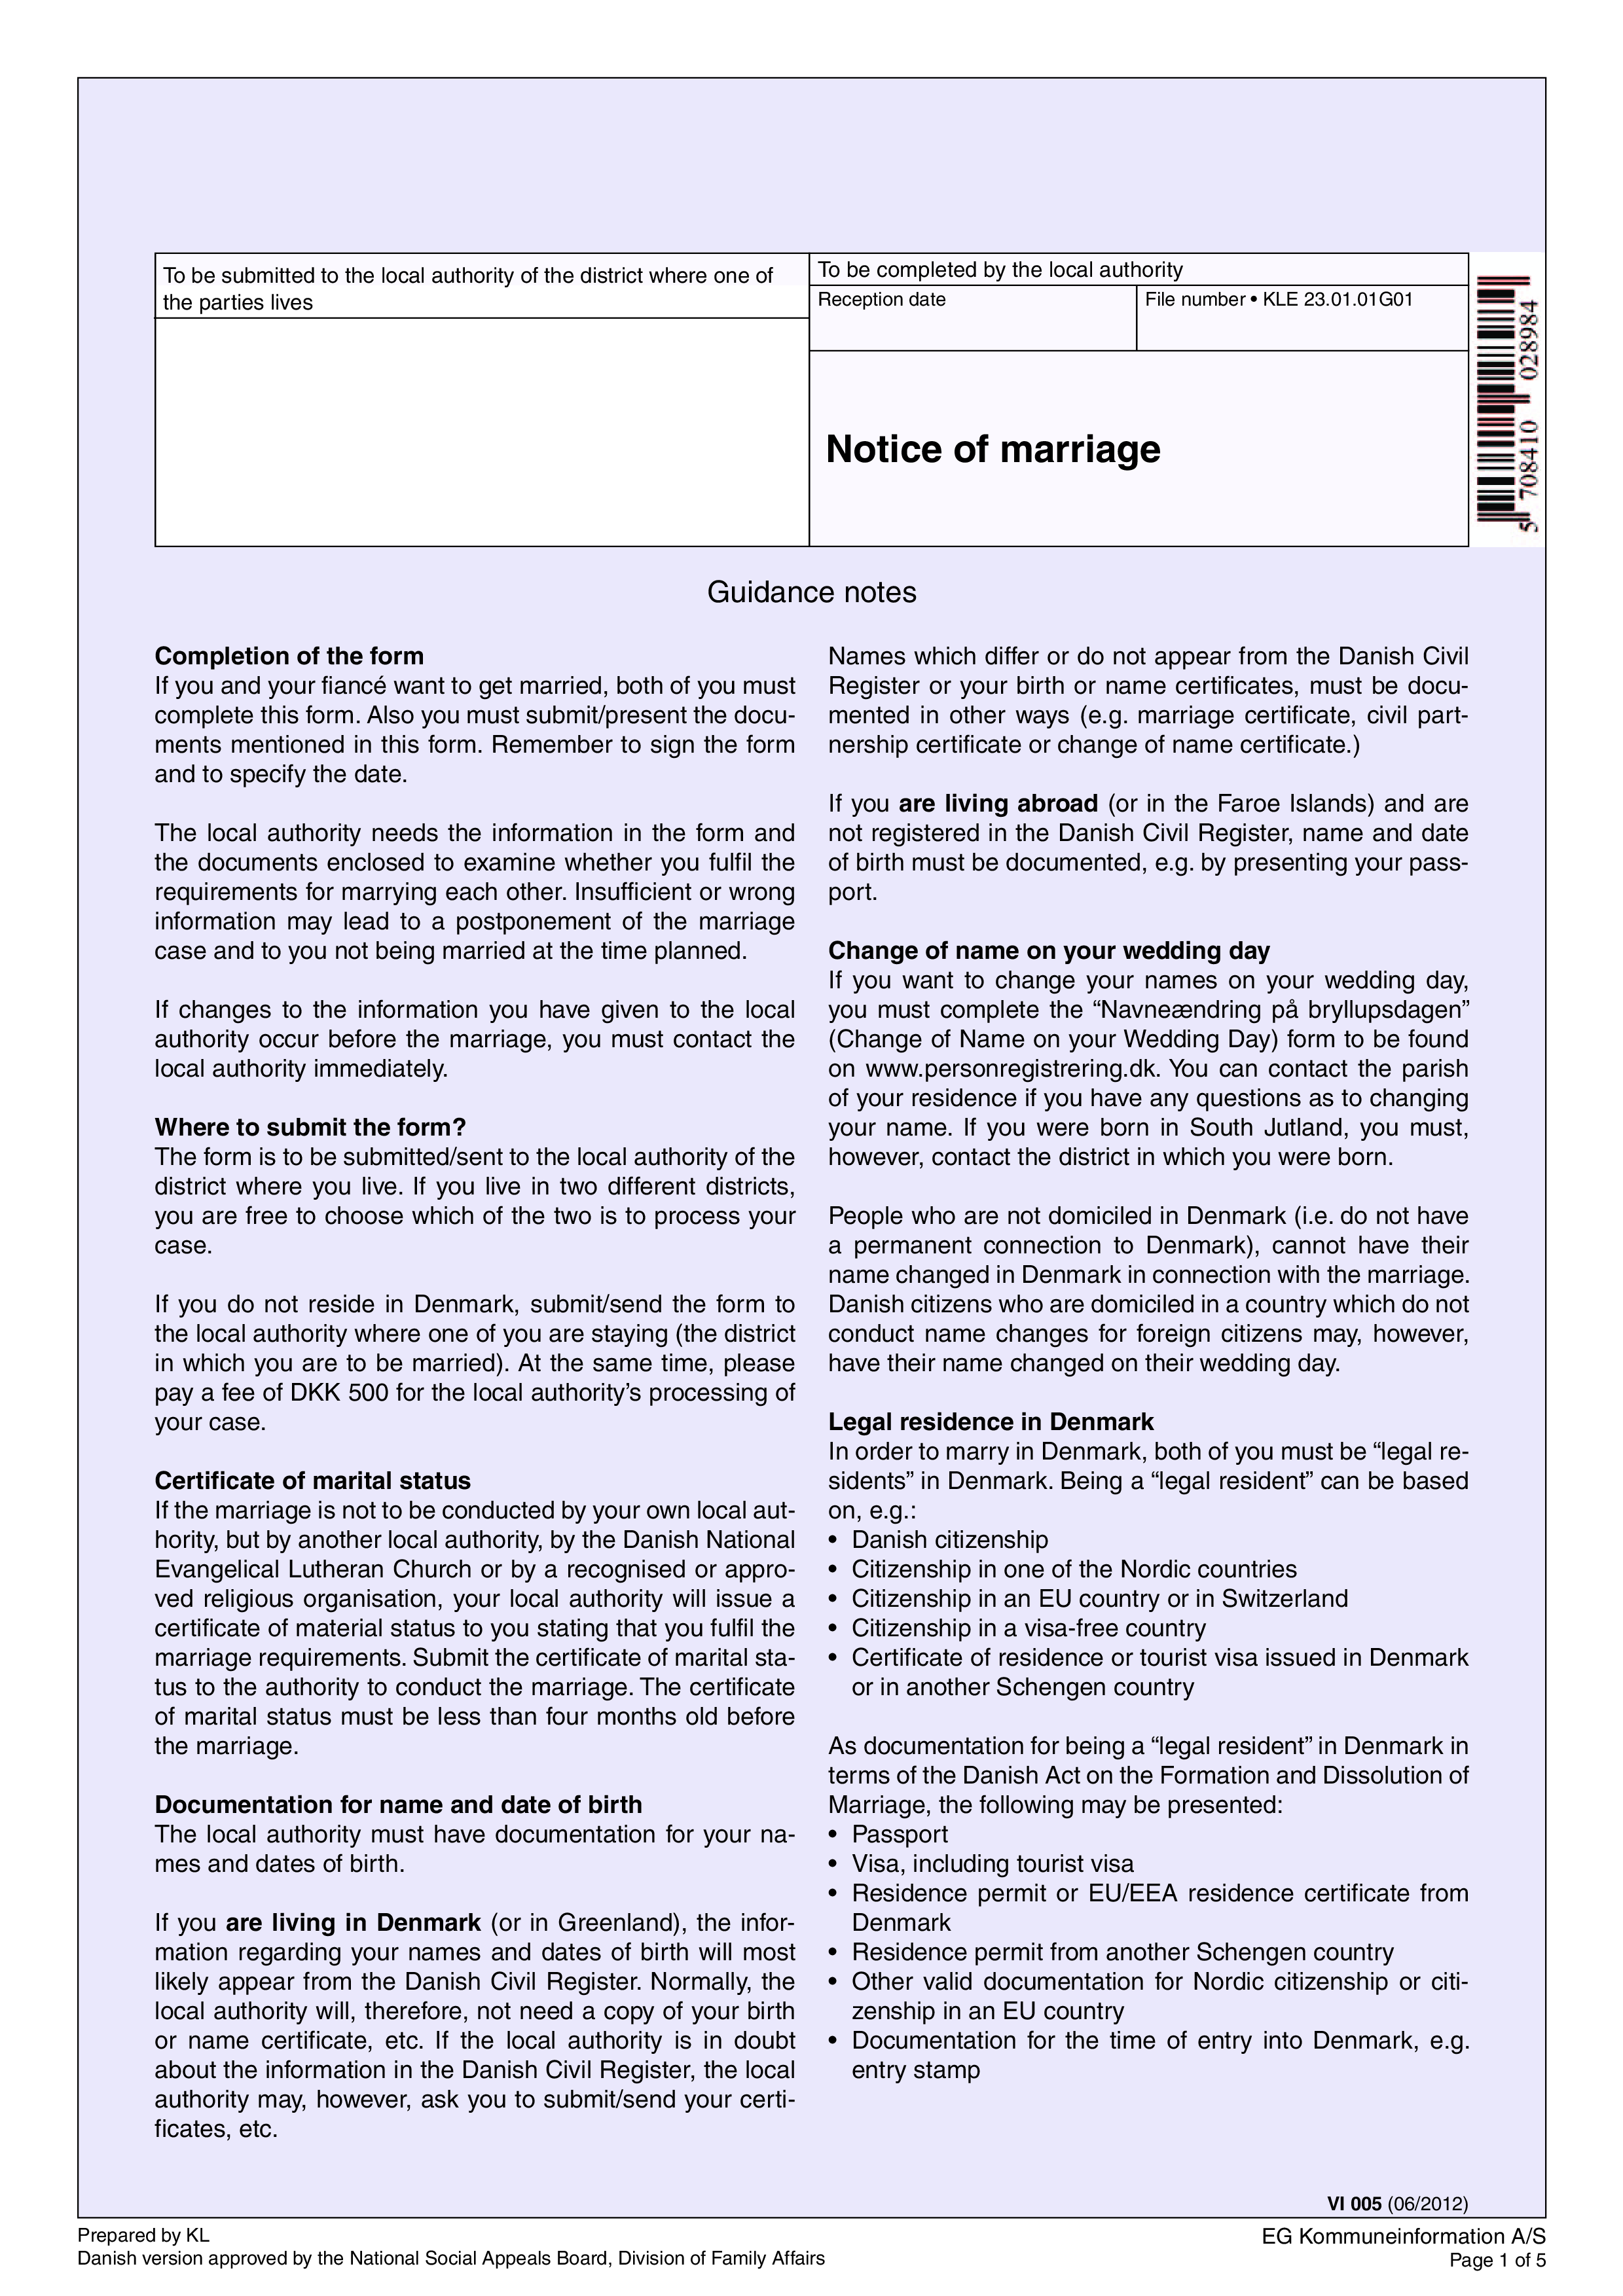 Marriage Separation Notice main image